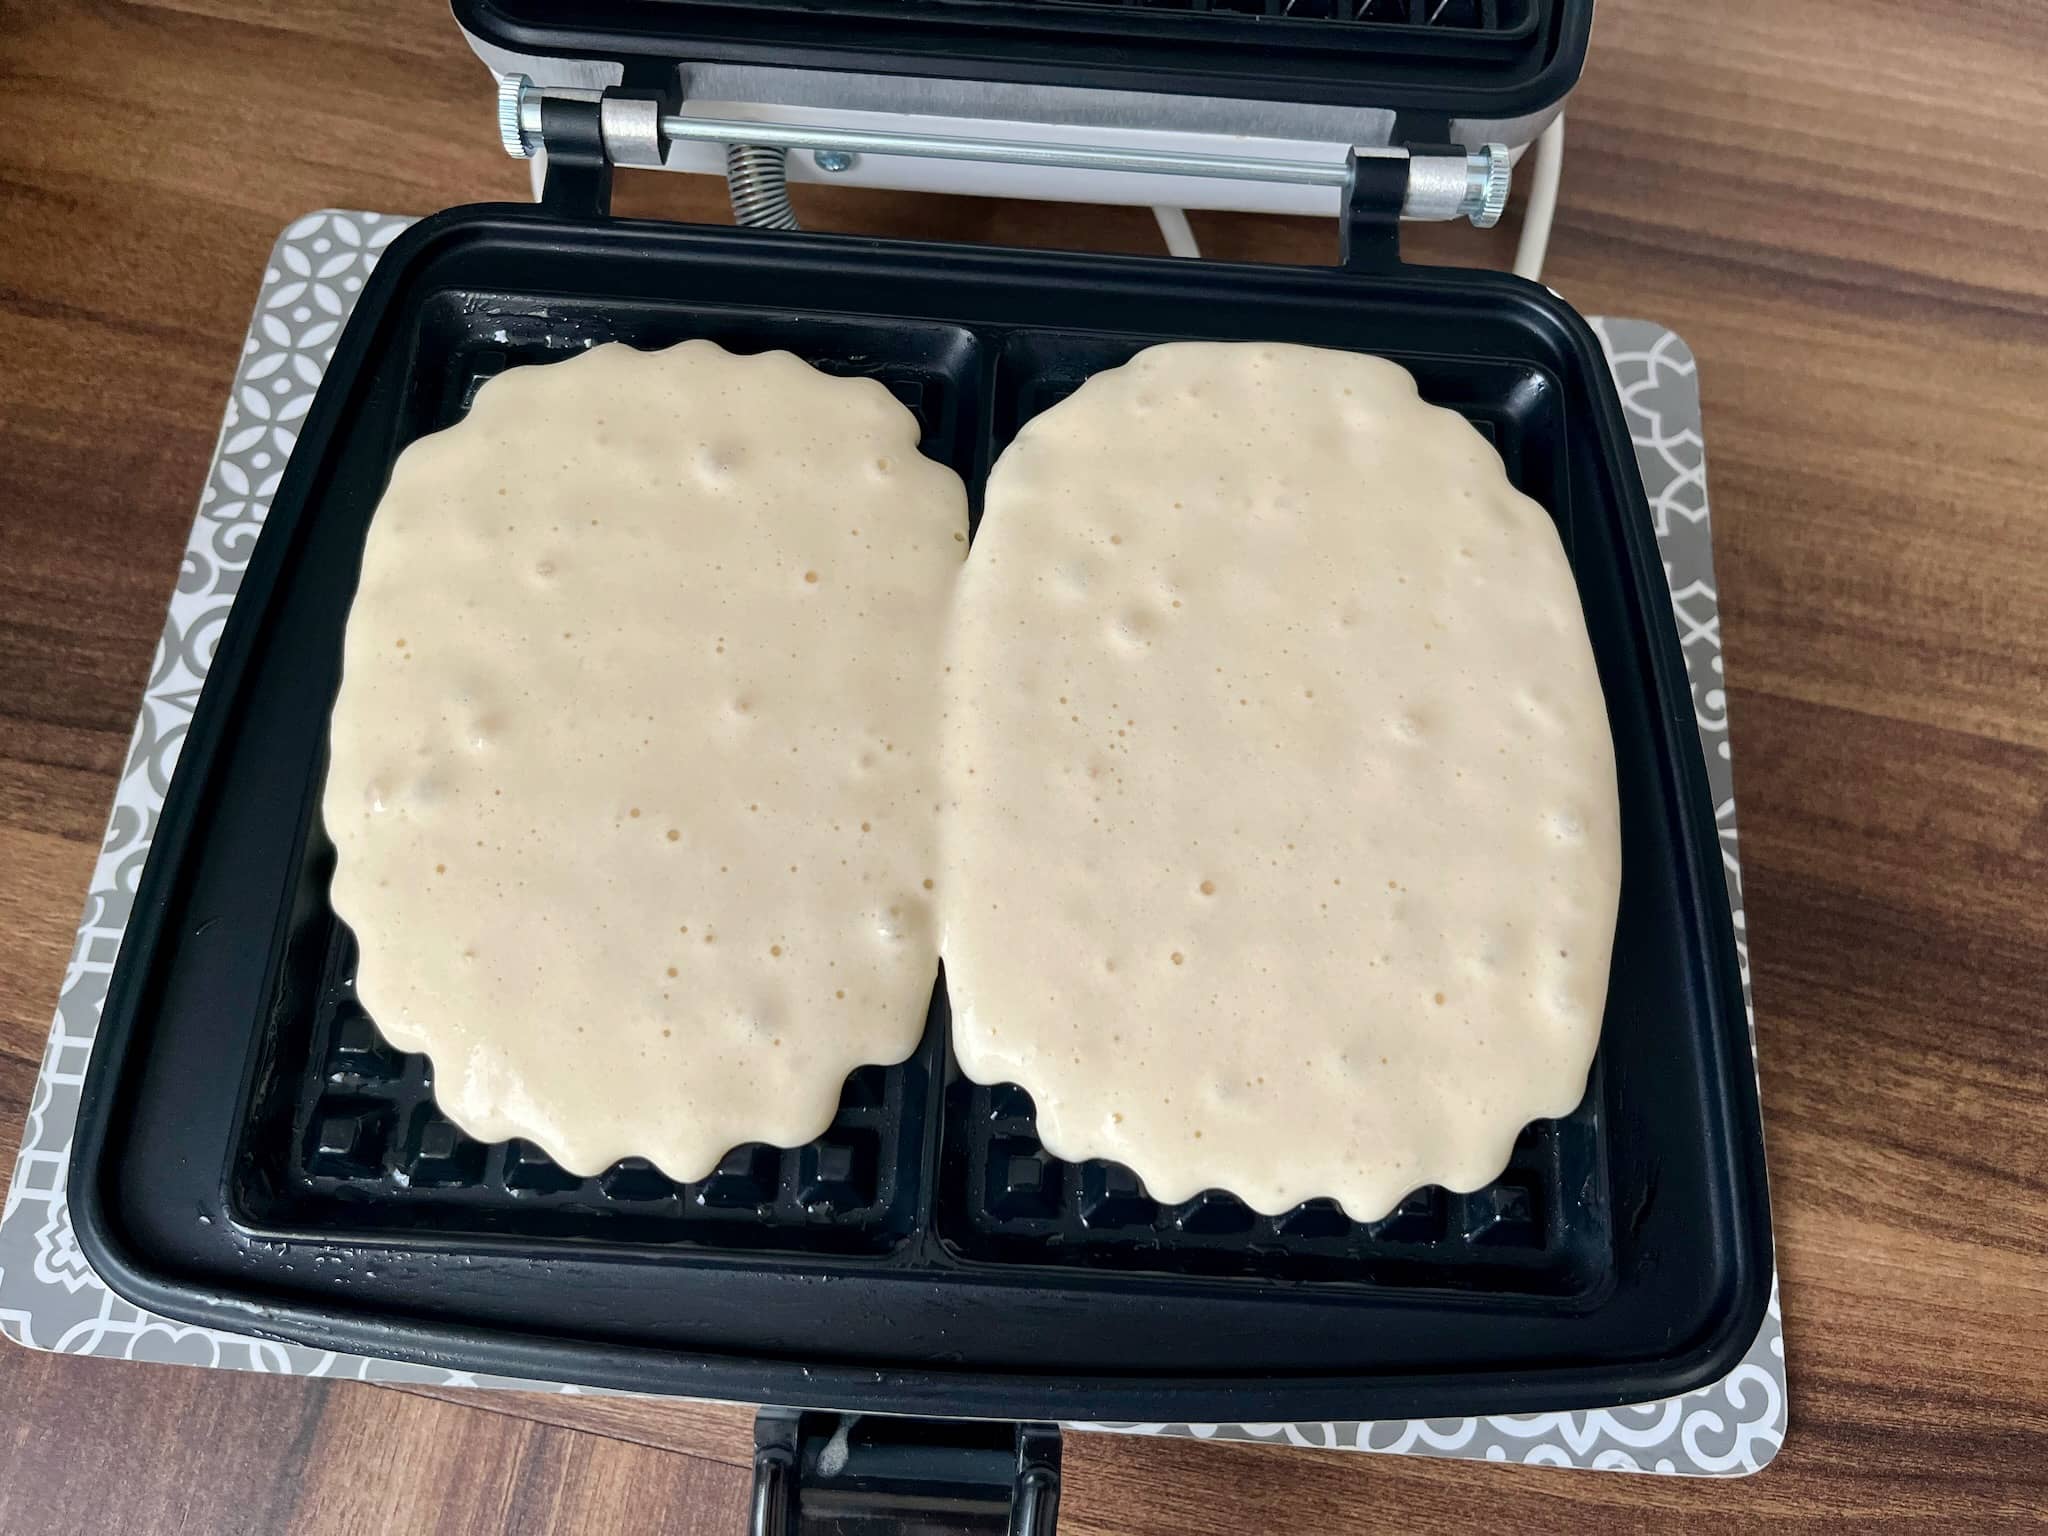 The first portion of waffles frying in a waffle maker